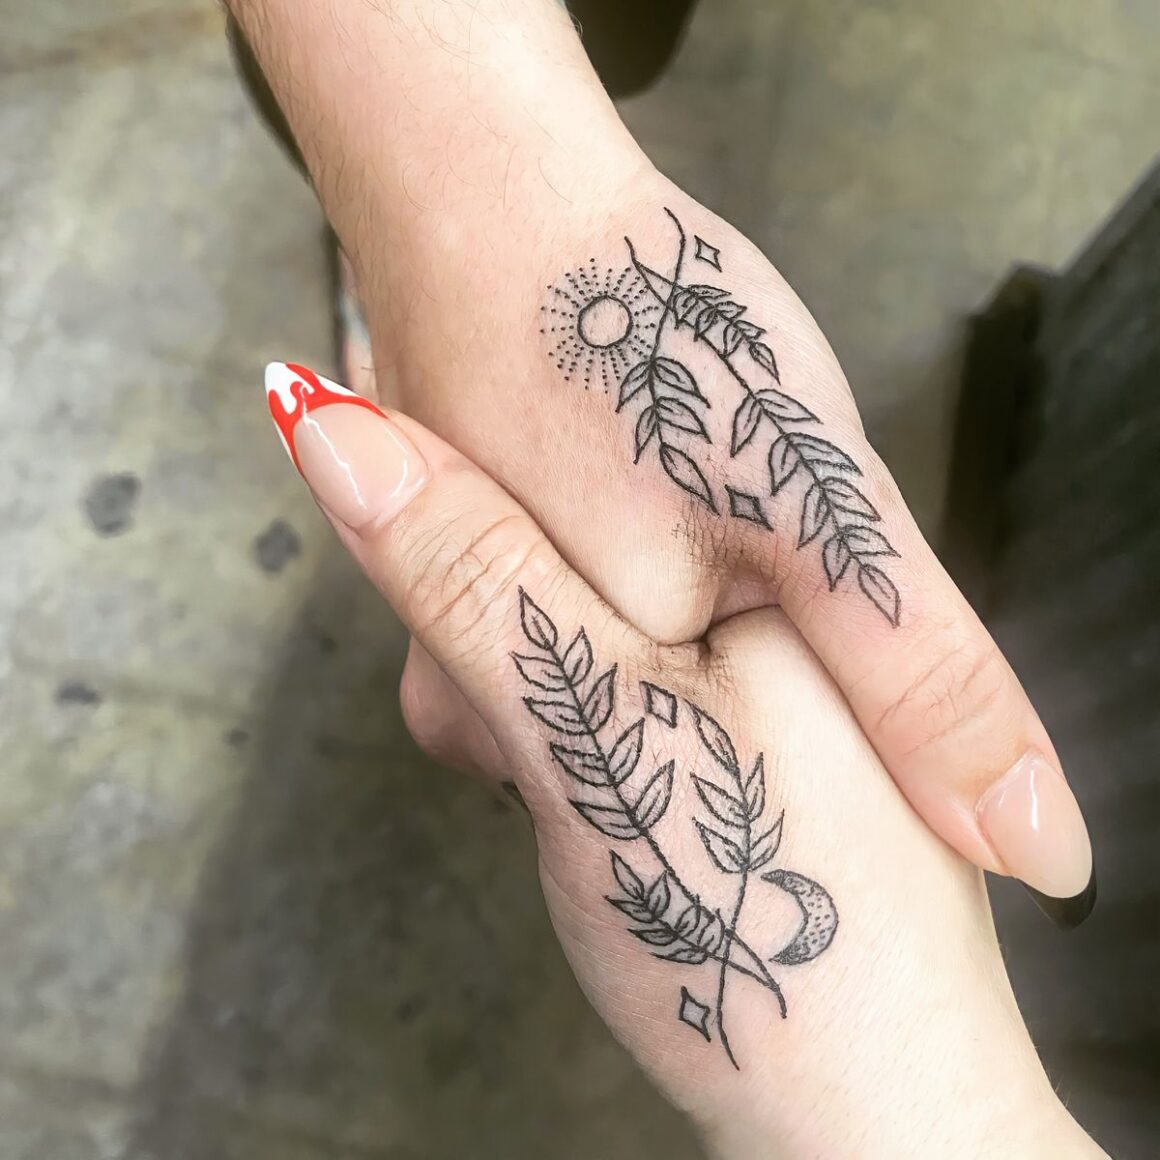 Best-Friend Edition Matching Tattoos | Gallery posted by Lana B | Lemon8